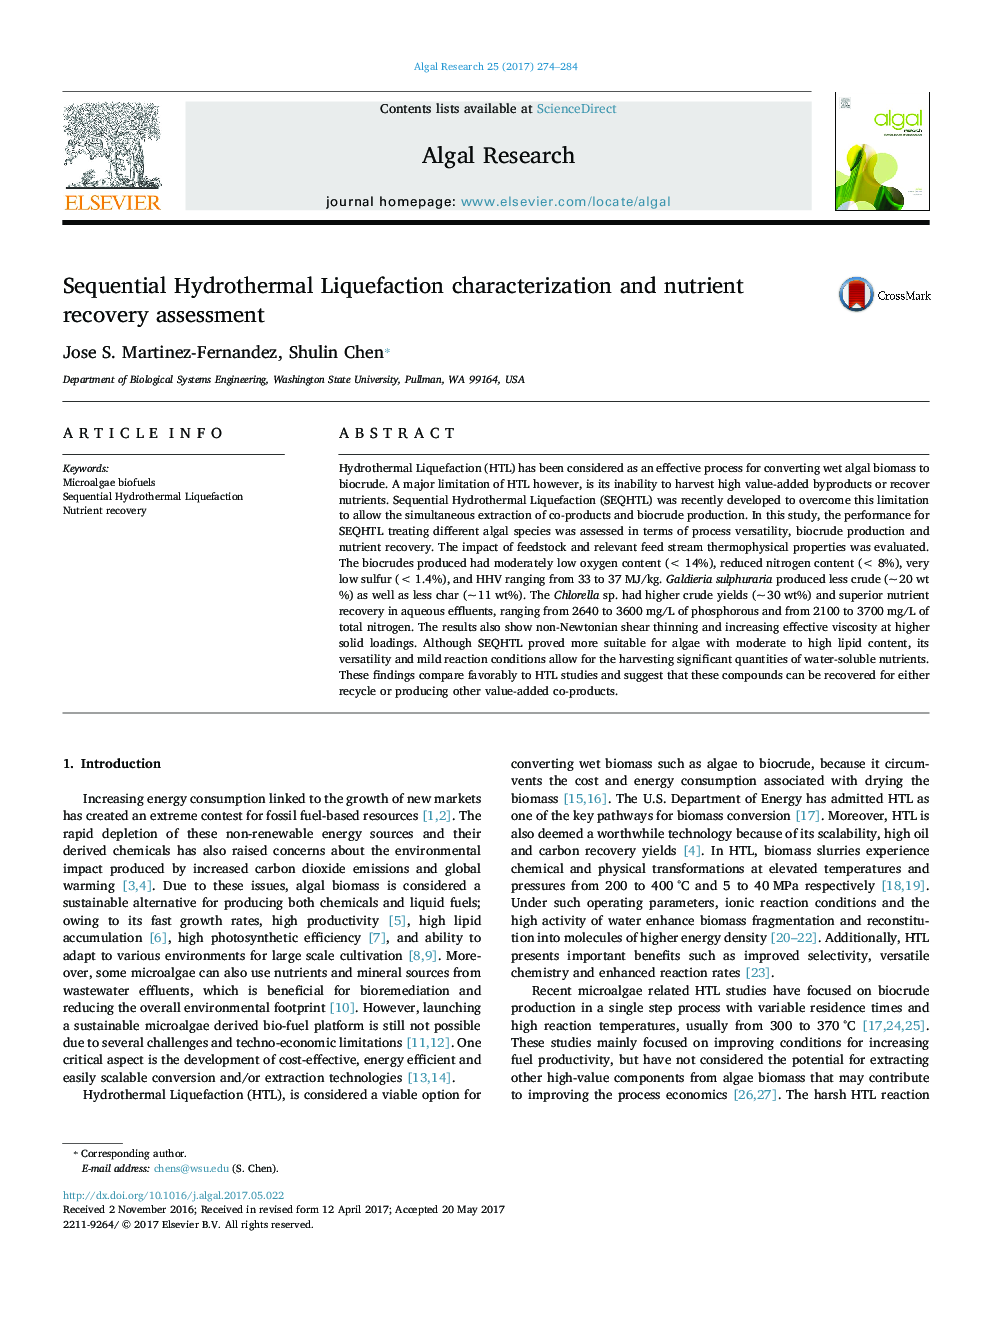 Sequential Hydrothermal Liquefaction characterization and nutrient recovery assessment